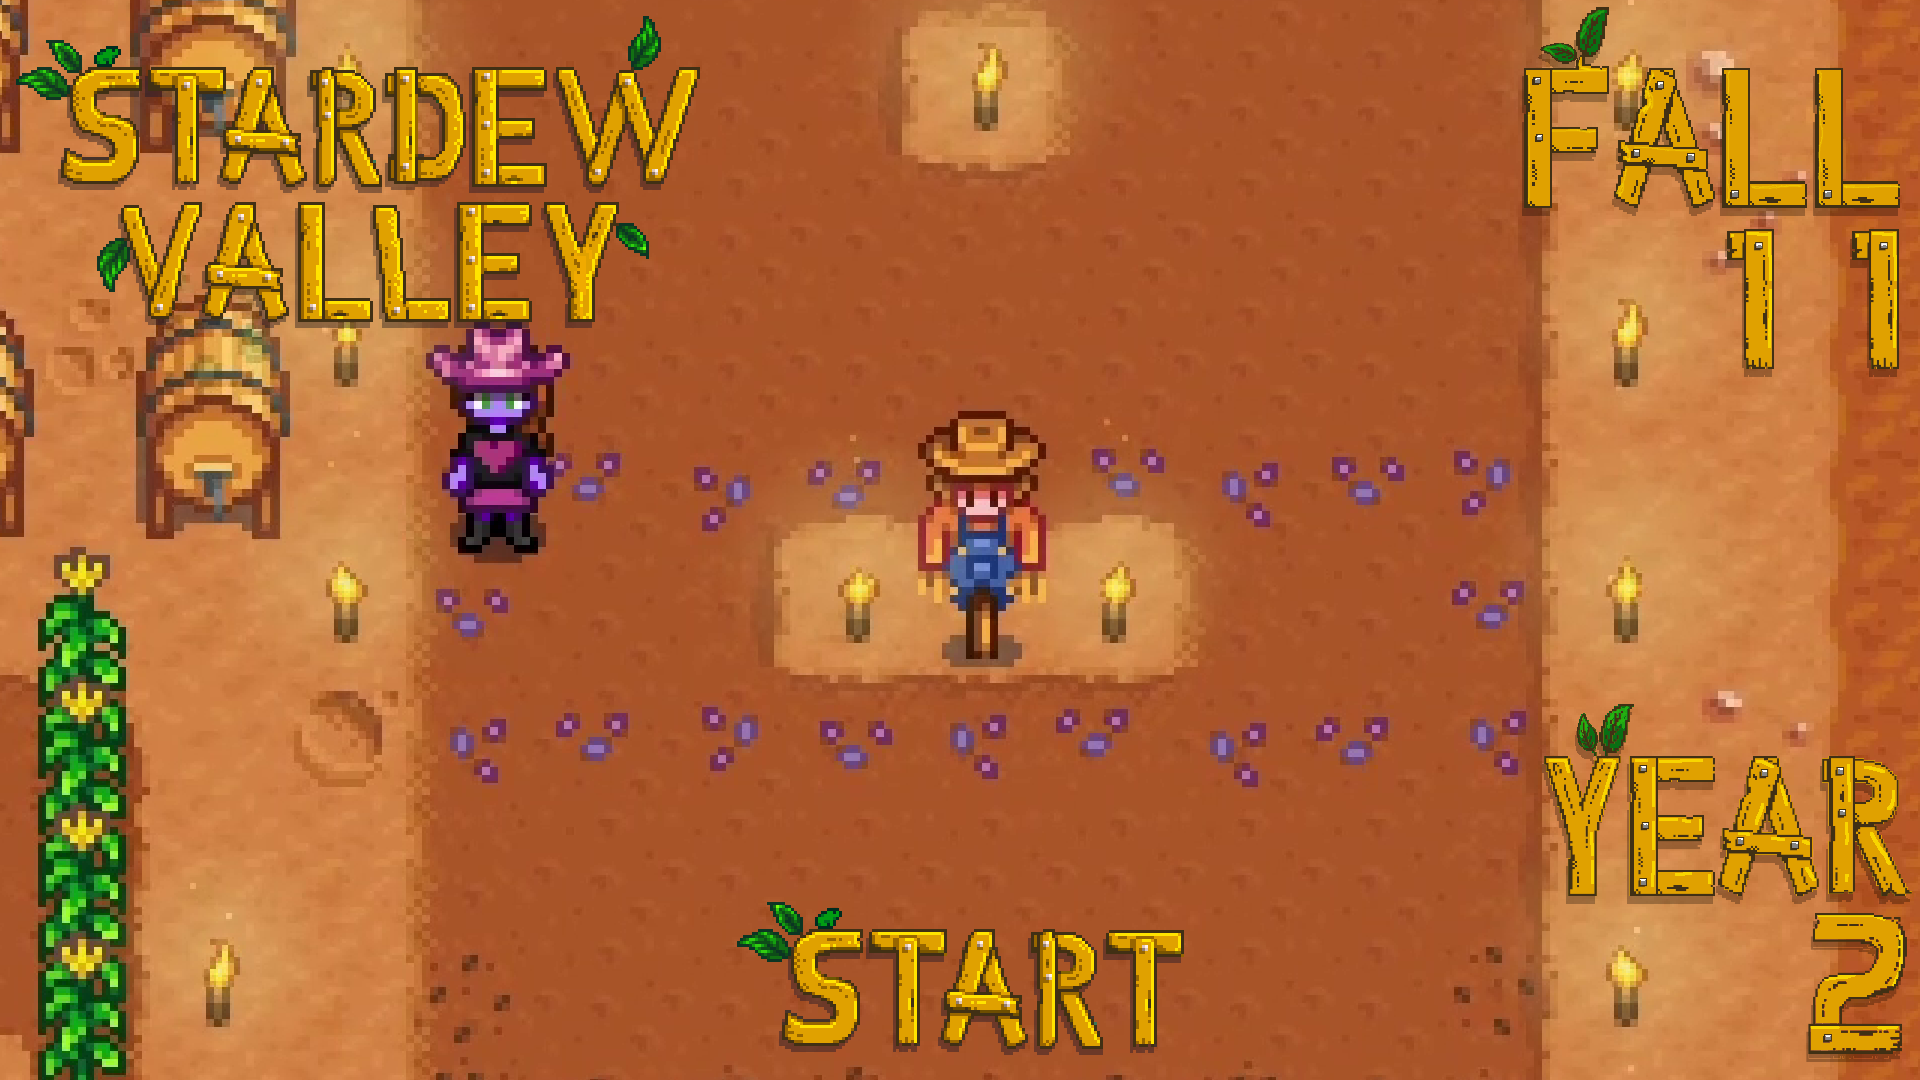 You Ever Eat So Much You Wish You Would Die? – Stardew Valley, Fall 11, Year 2, Start